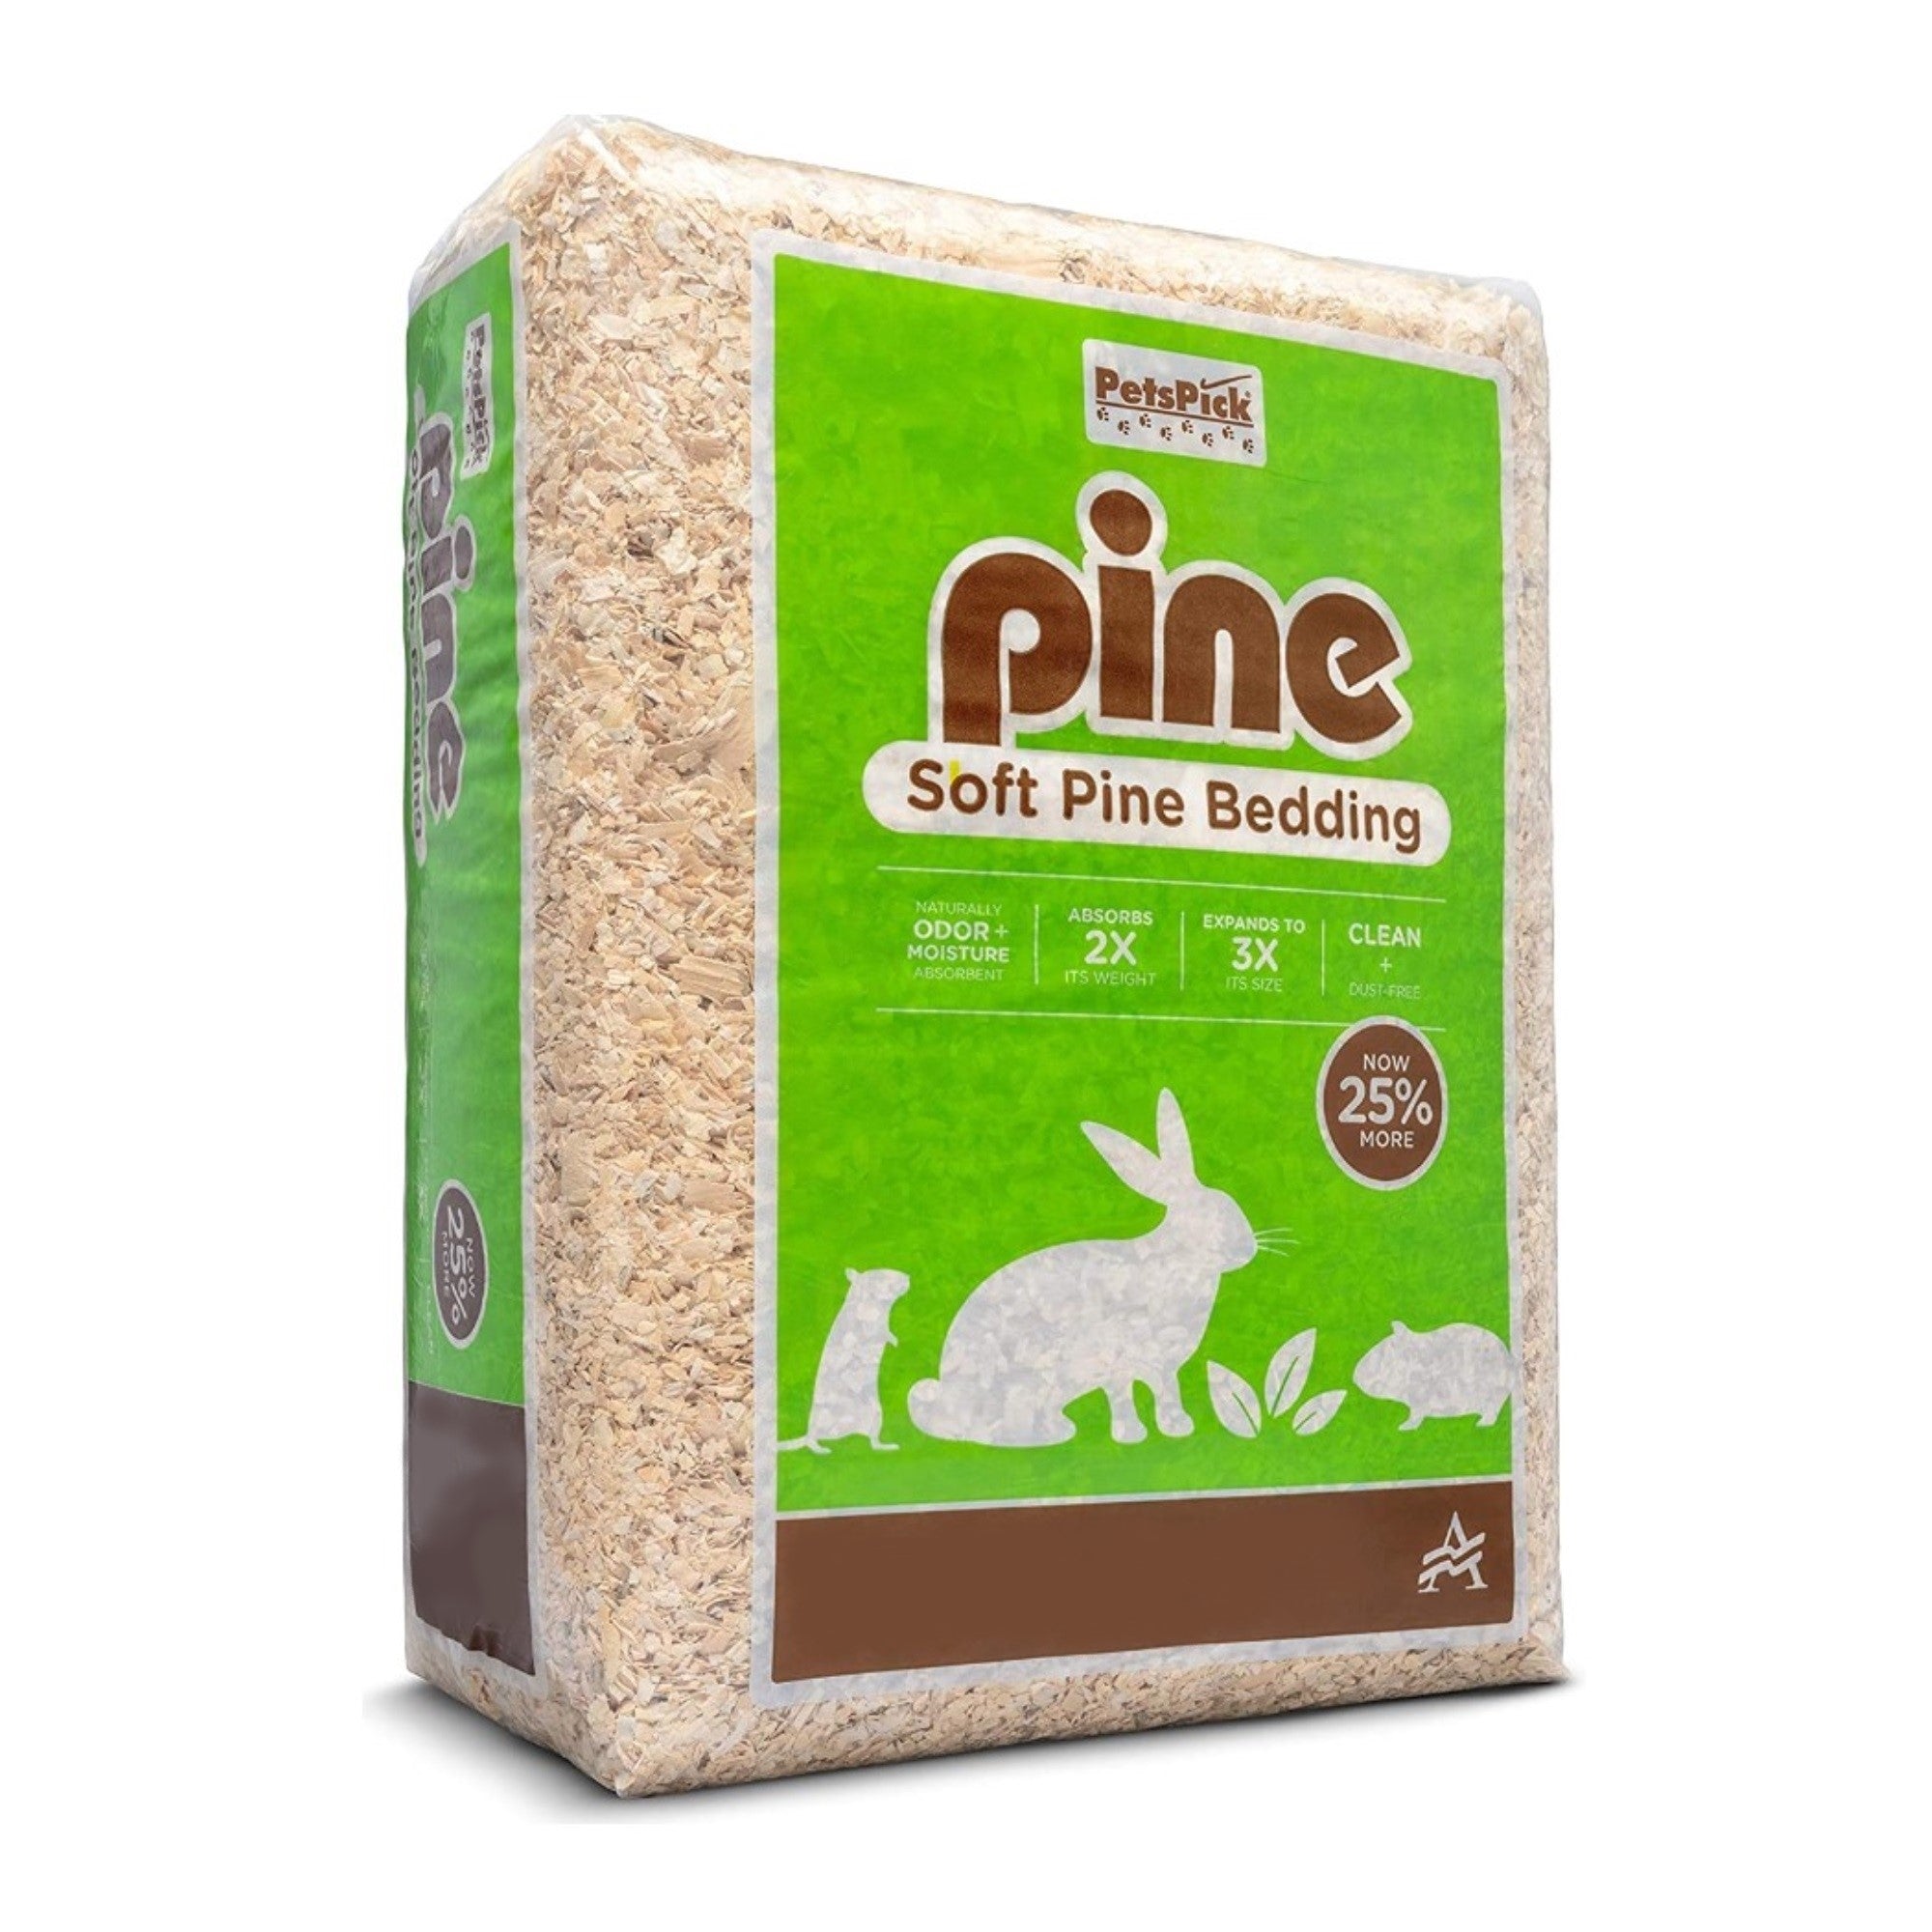 PetsPick Kiln Dried Soft Pine Bedding For Small Pets